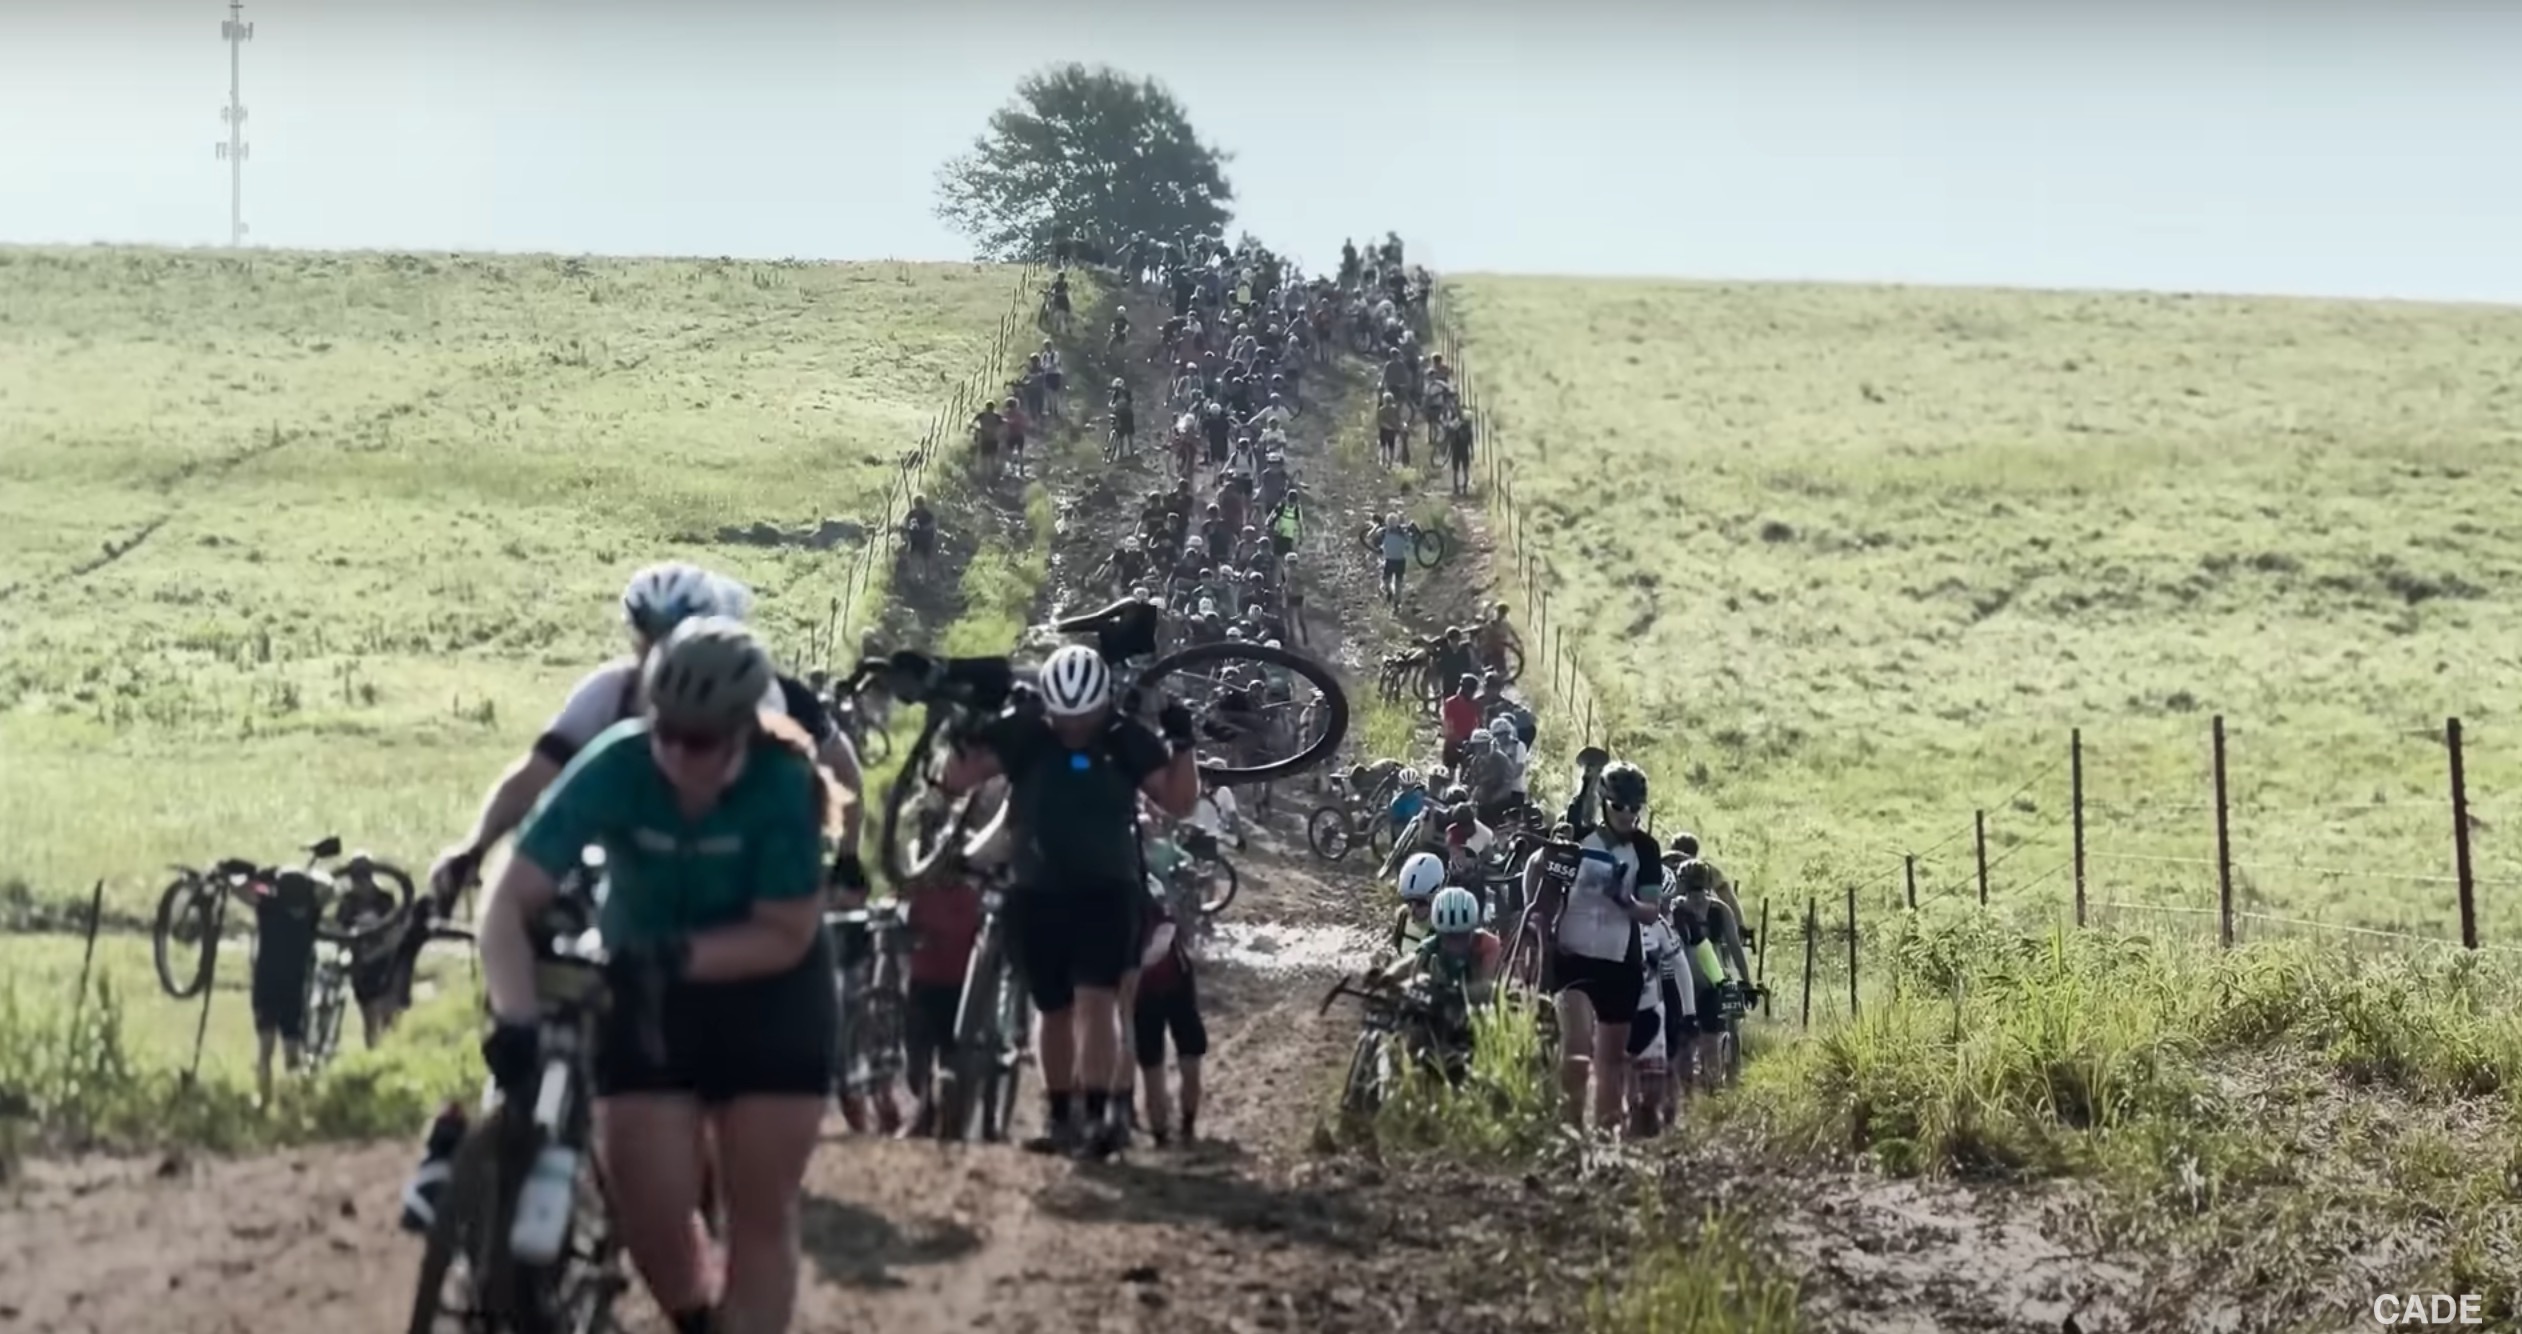 Cyclists walk their bikes through a muddy portion of the 2023 Unbound gravel race